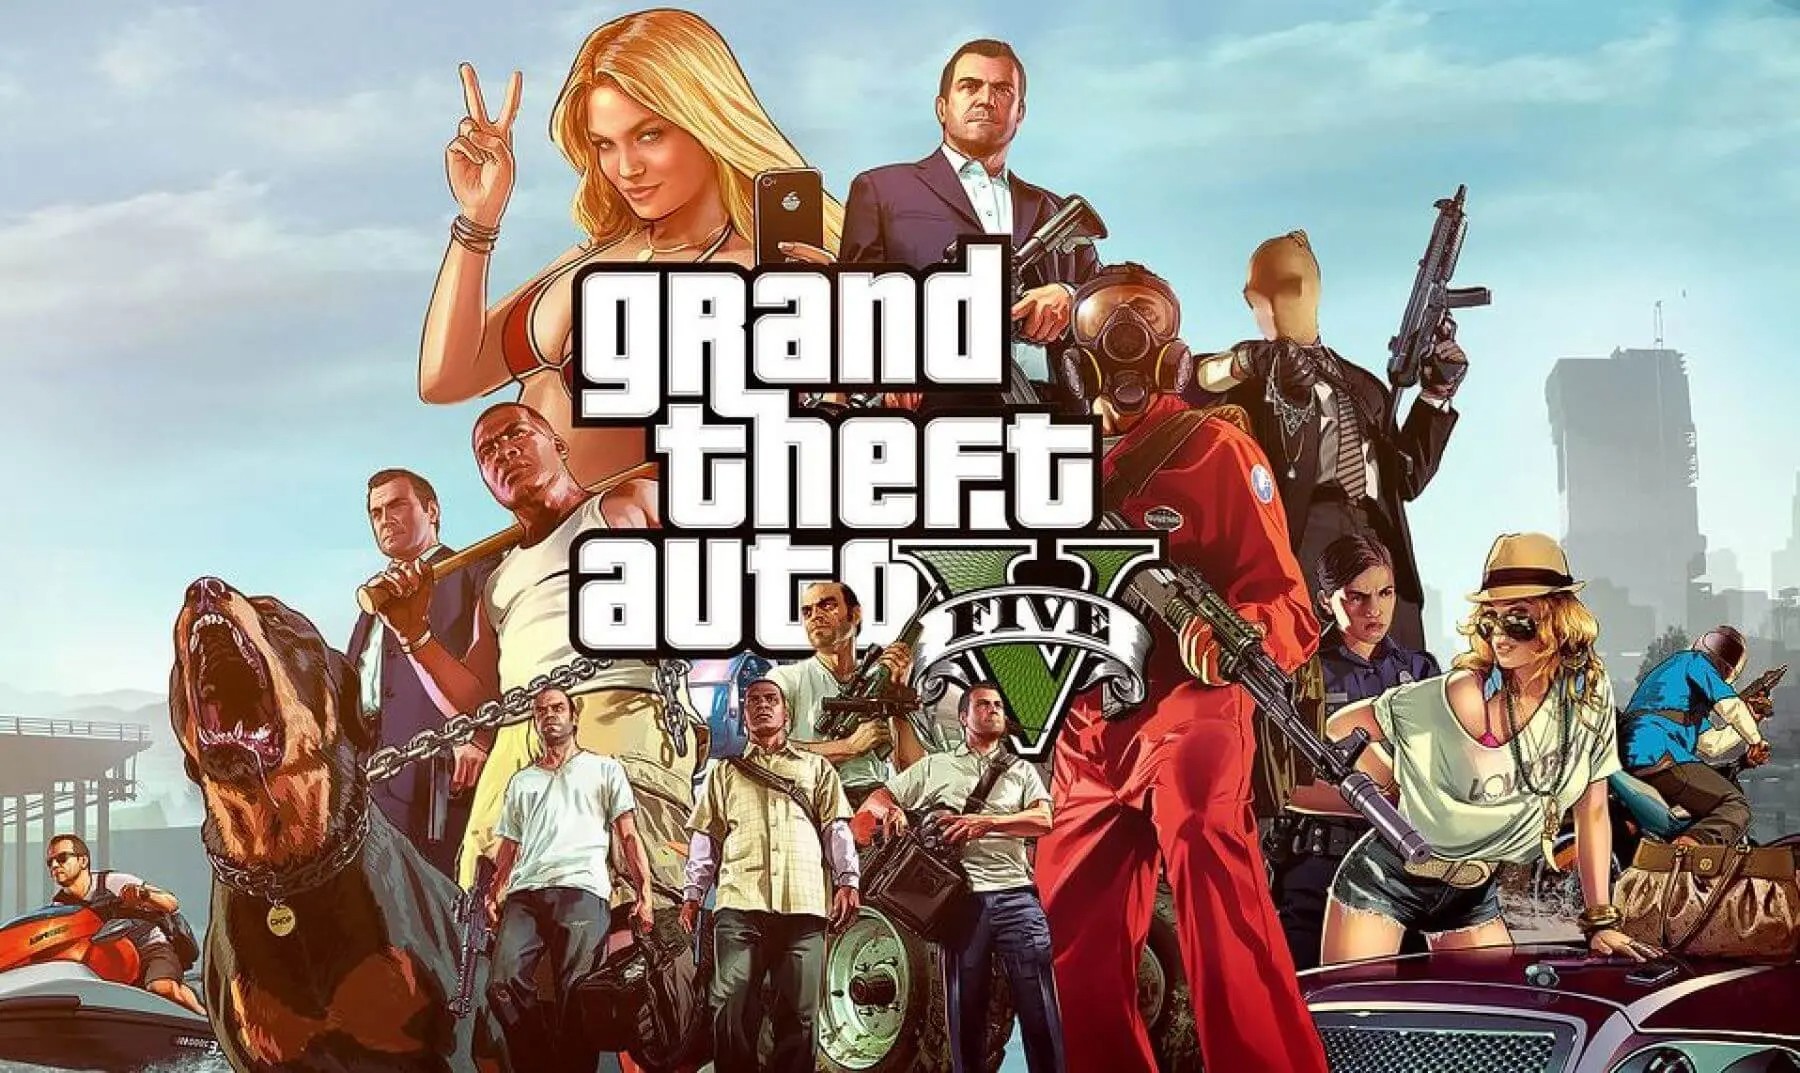 GTA 5 Has Made More Money Than Any Film, Book or Game, Says Analyst